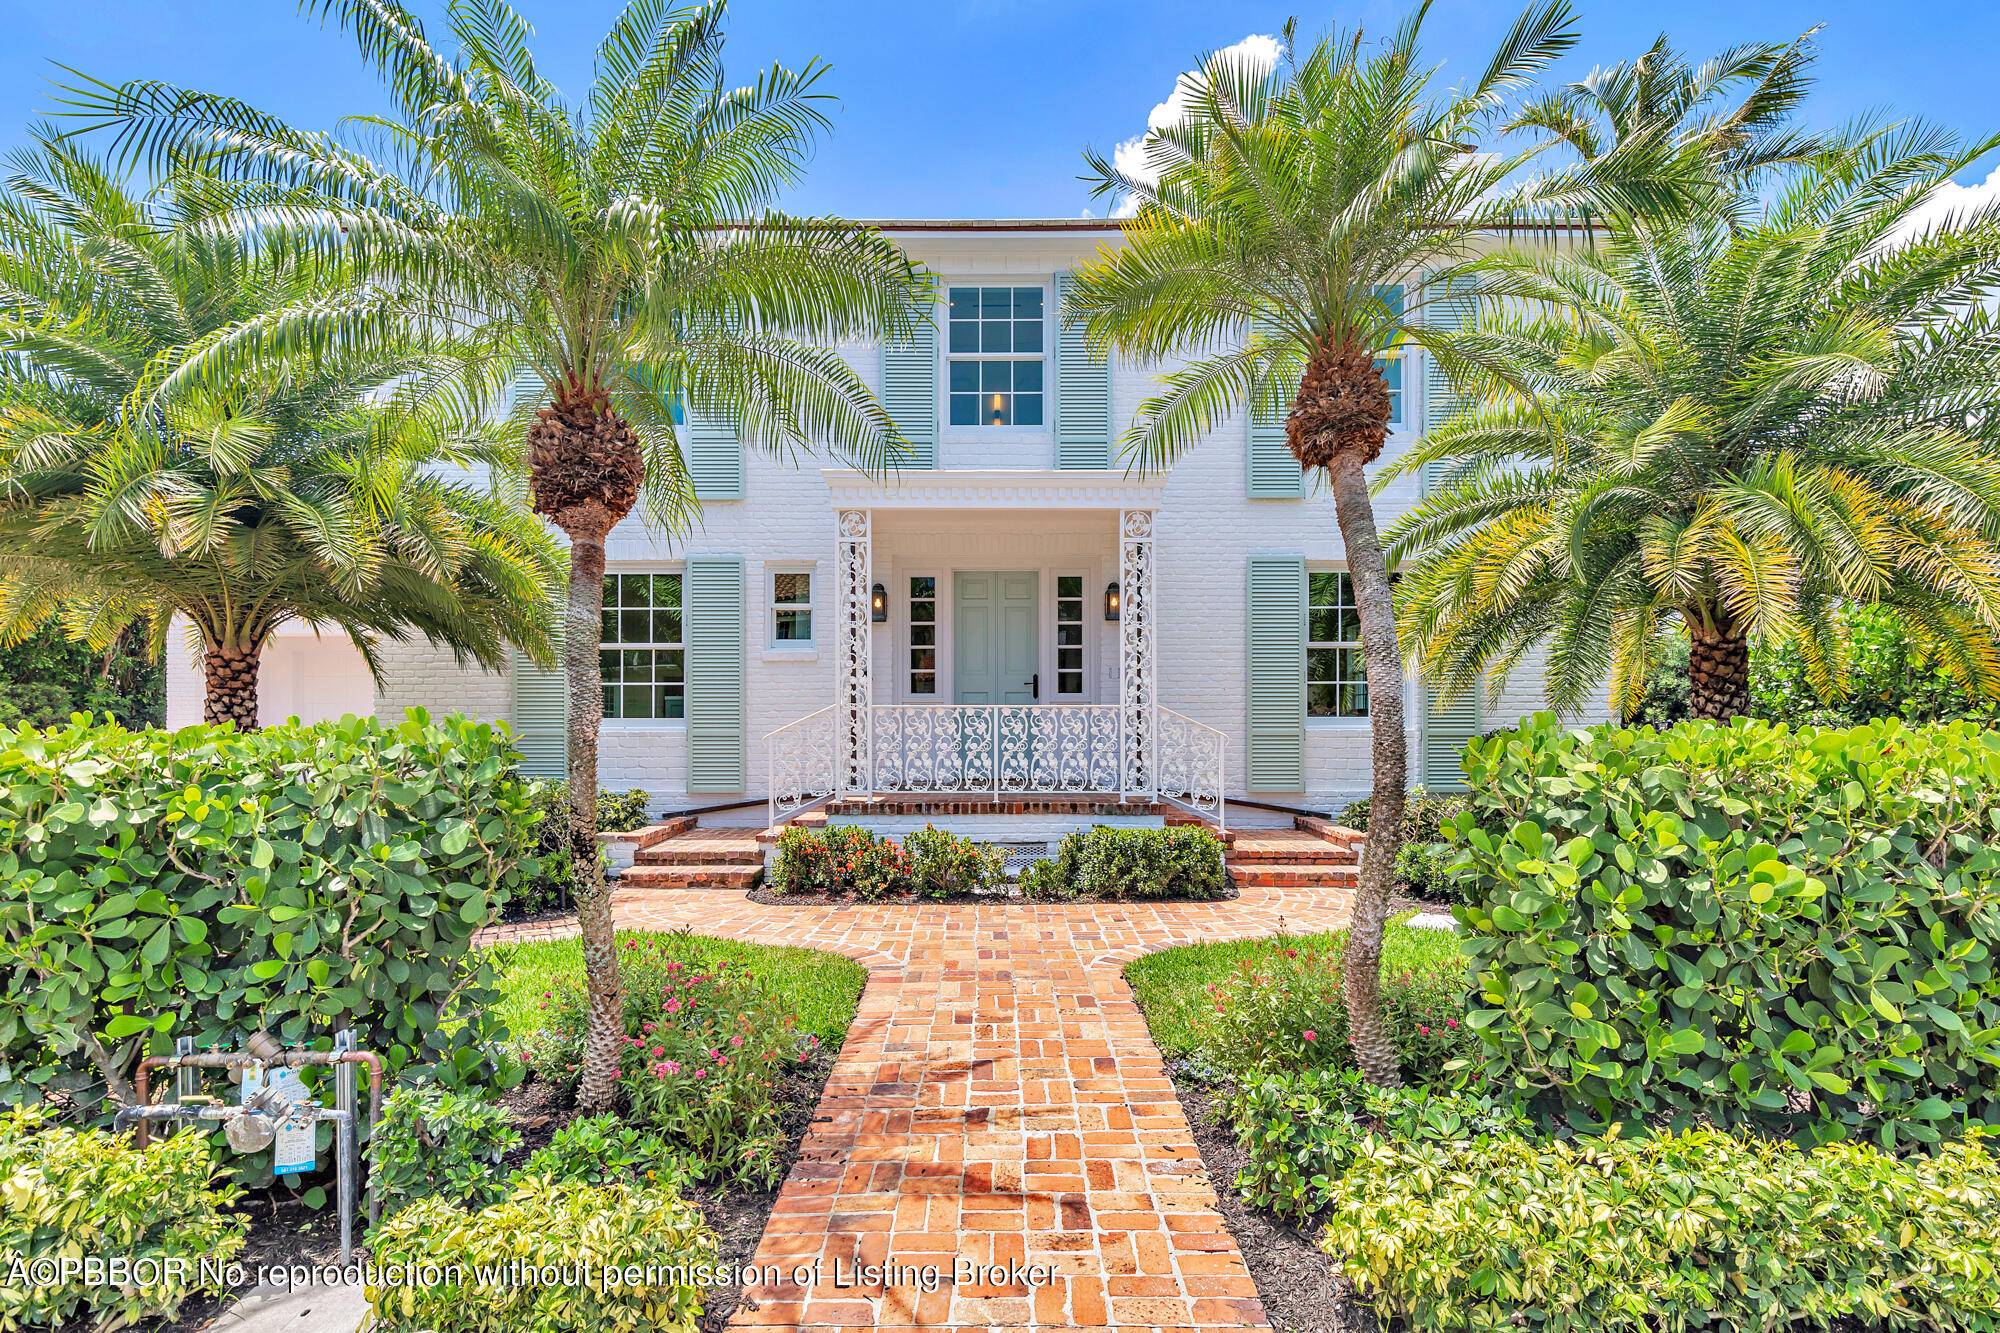 Located at 236 Pendleton Avenue, this exquisite Palm Beach Island home offers the perfect blend of timeless elegance and modern living.